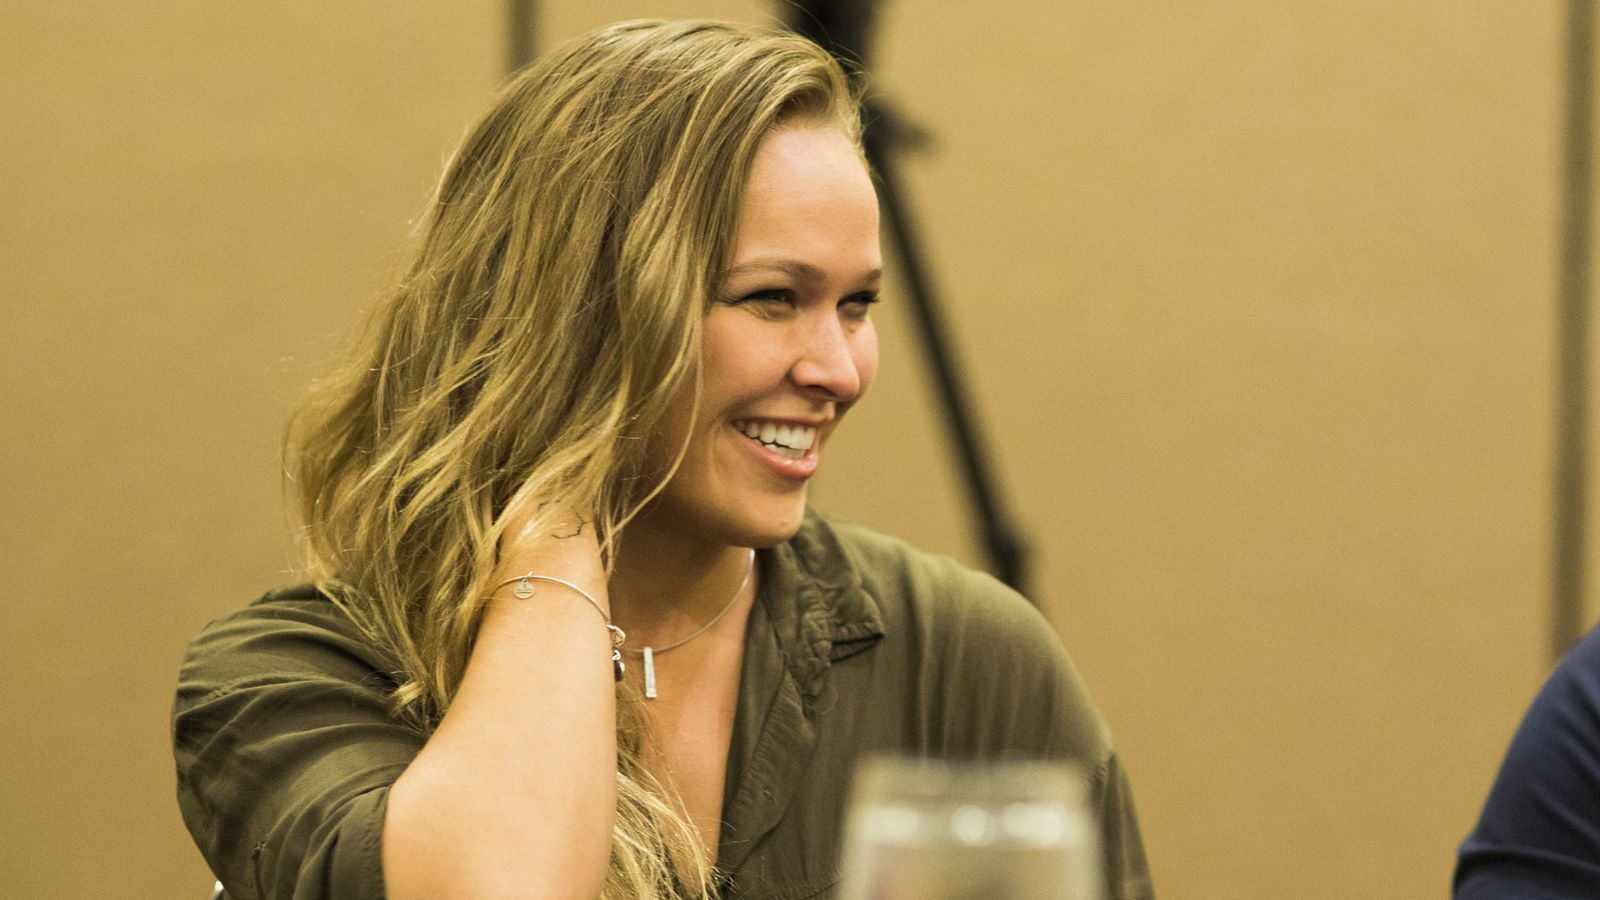 Ronda Rousey rips 'mama's basement blogger' for asking whether UFC